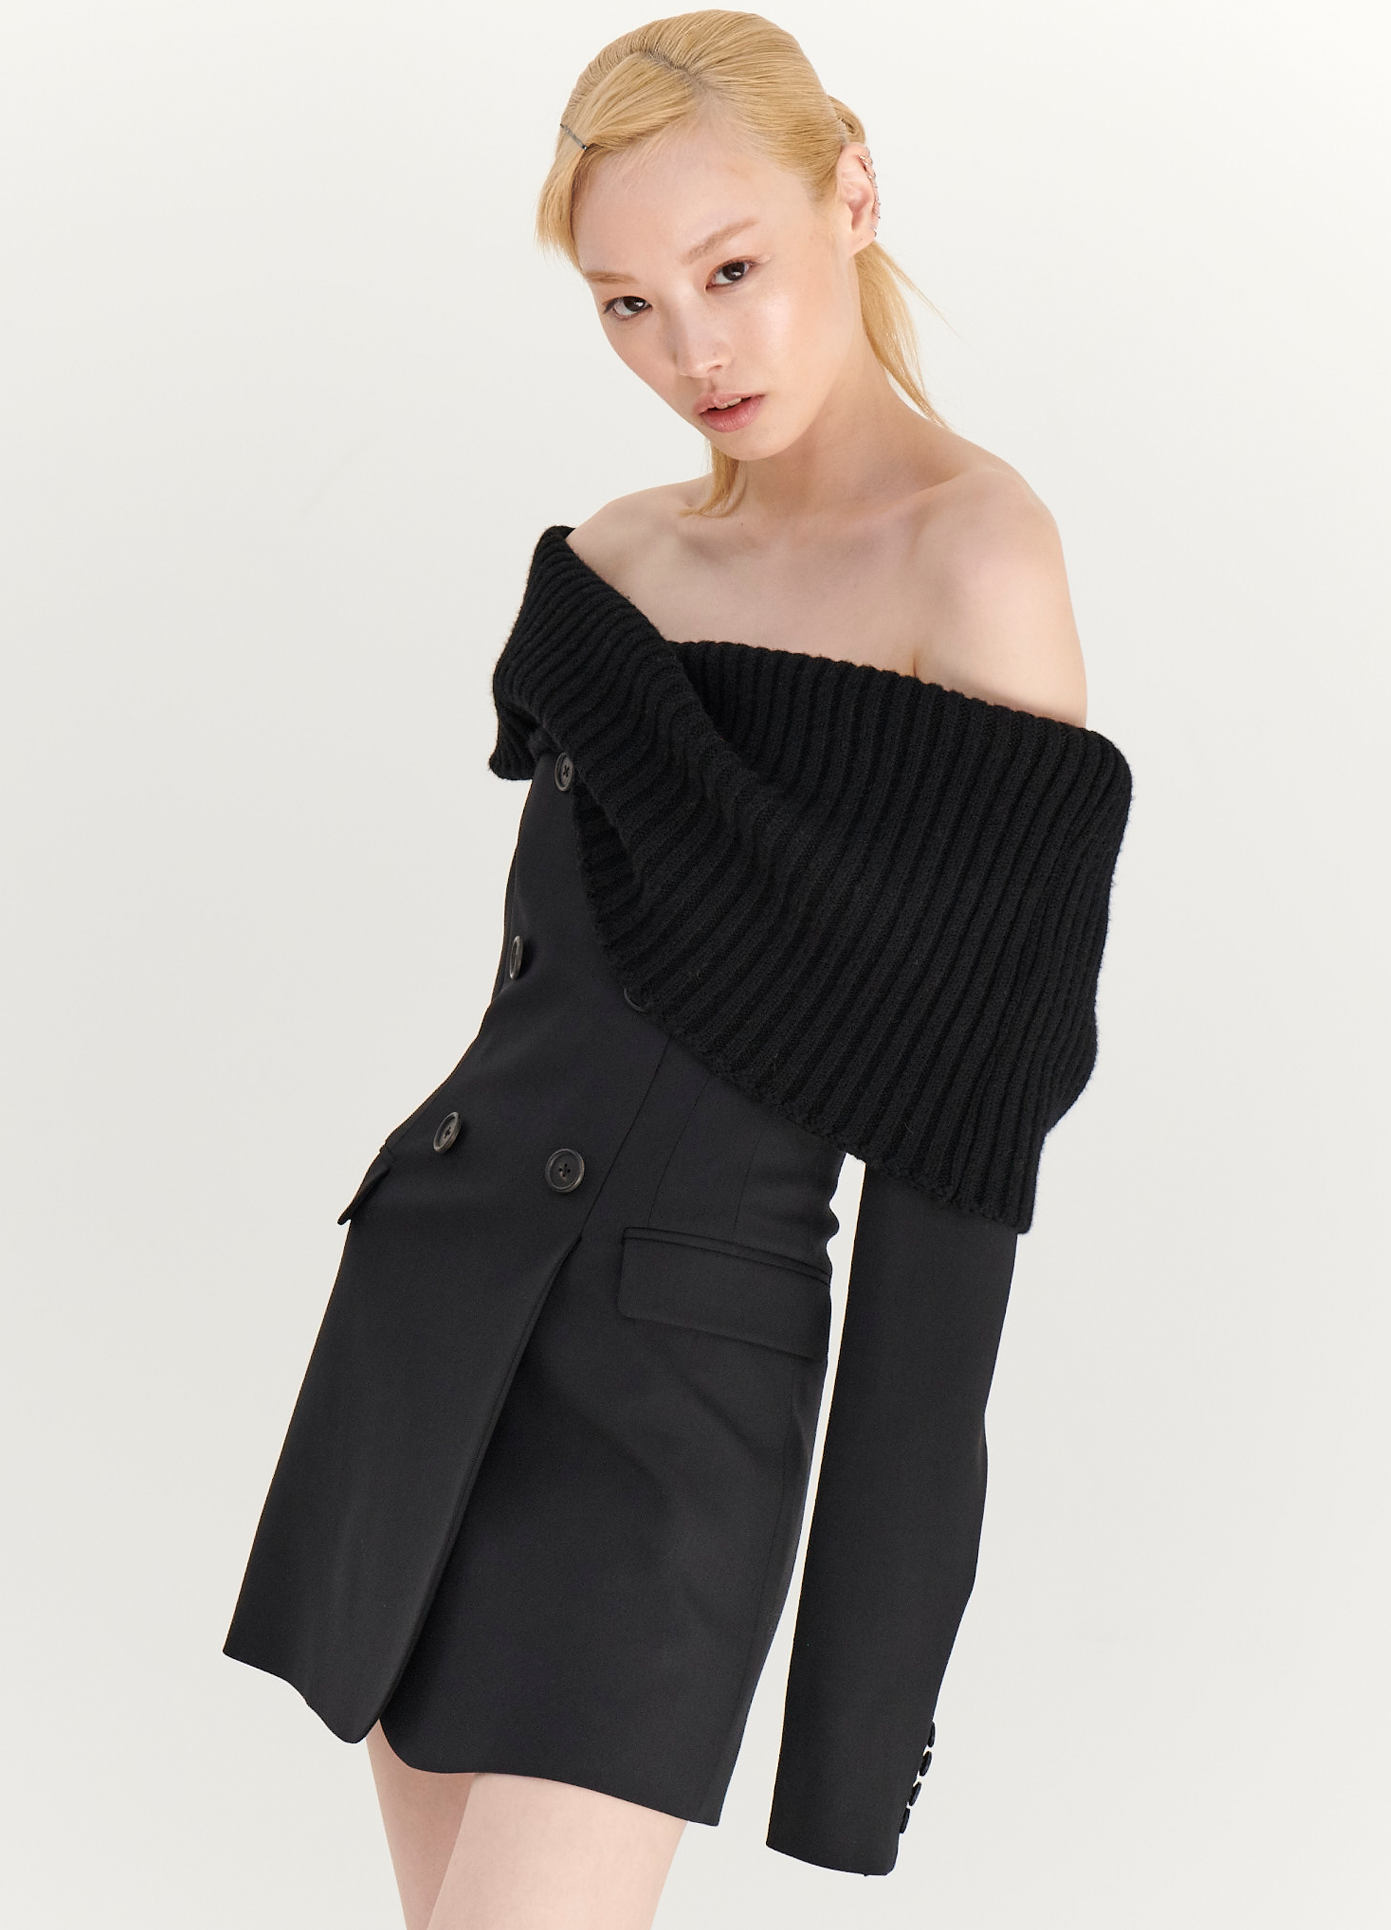 MONSE Off the Shoulder Knit Collar Dress in Black on model front side view